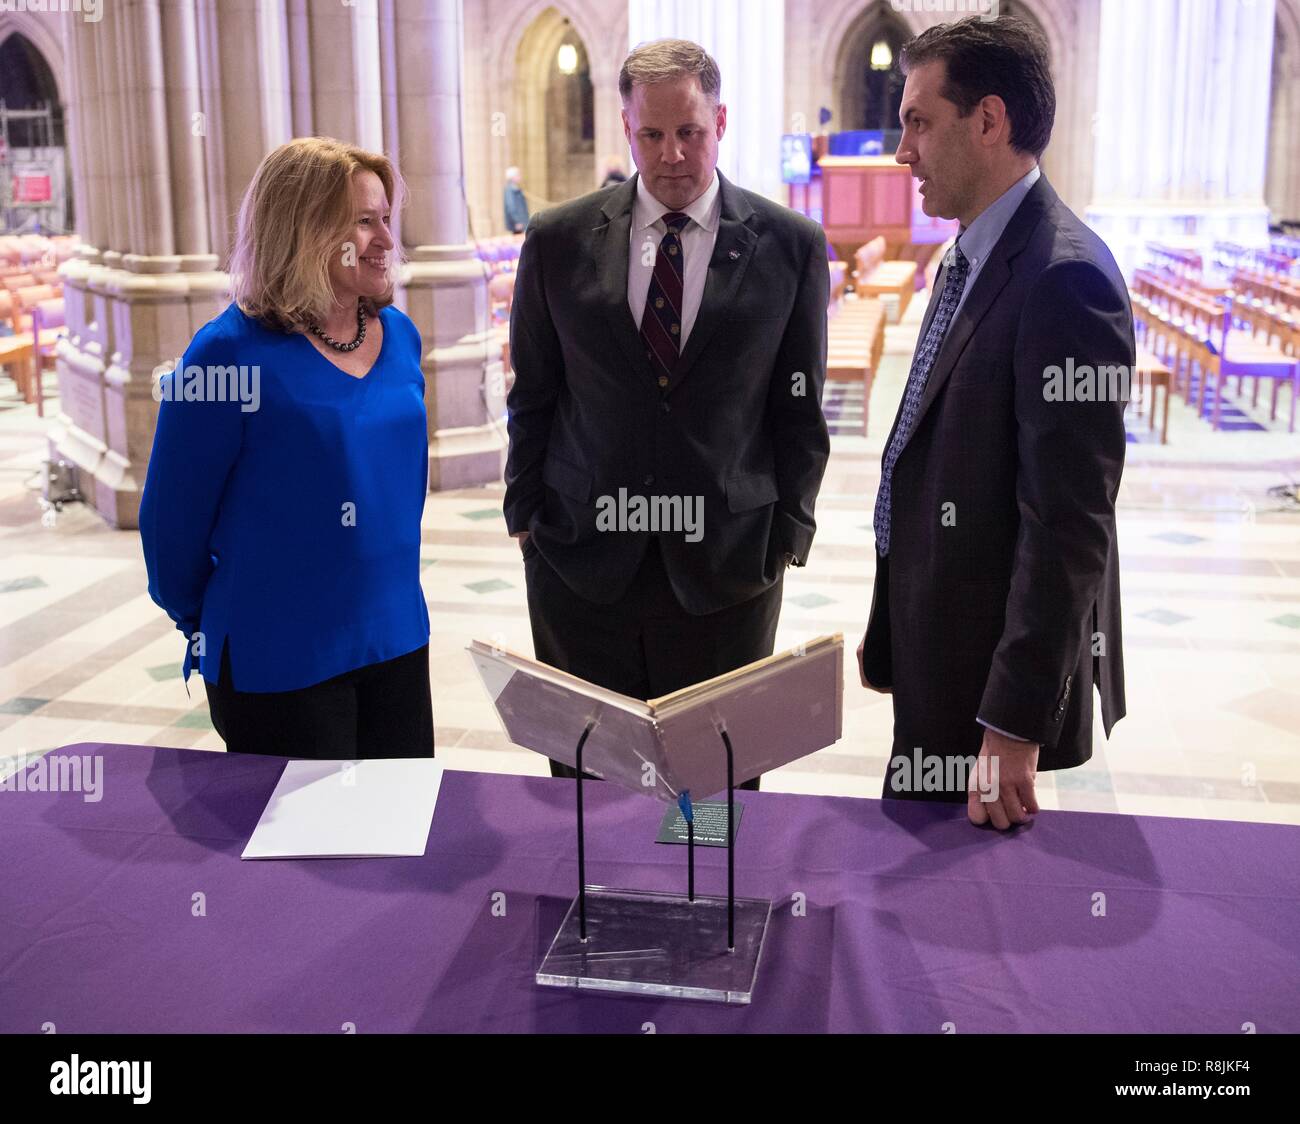 Director of Smithsonian National Air and Space Museum Ellen Stofan, left, NASA Administrator Jim Bridenstine, center, and Andrew Johnston, from the Chicago Adler Planetarium view NASA astronaut Jim Lovells Apollo 8 flight plan on display at the Spirit of Apollo event commemorating the 50th anniversary of Apollo 8 at the National Cathedral December 11, 2018 in Washington, DC. Apollo 8 was the first manned spaceflight to the Moon and back carrying astronauts Frank Borman, Jim Lovell, and William Anders in December of 1968. Stock Photo